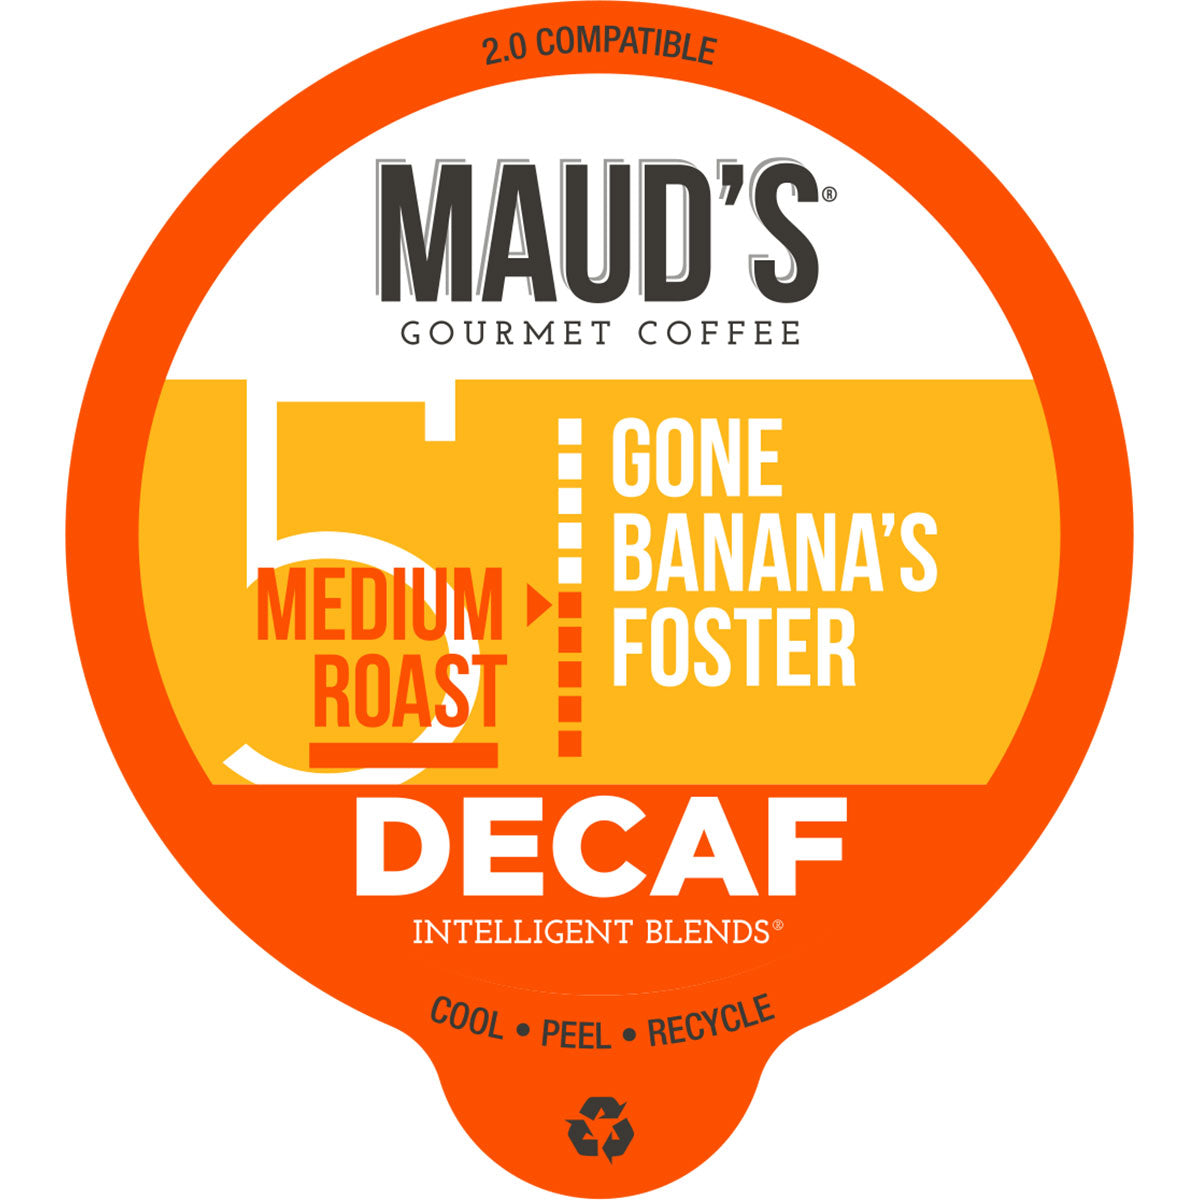 Maud's Decaf Banana Foster Flavored Coffee Pods (Gone Banana's Foster)